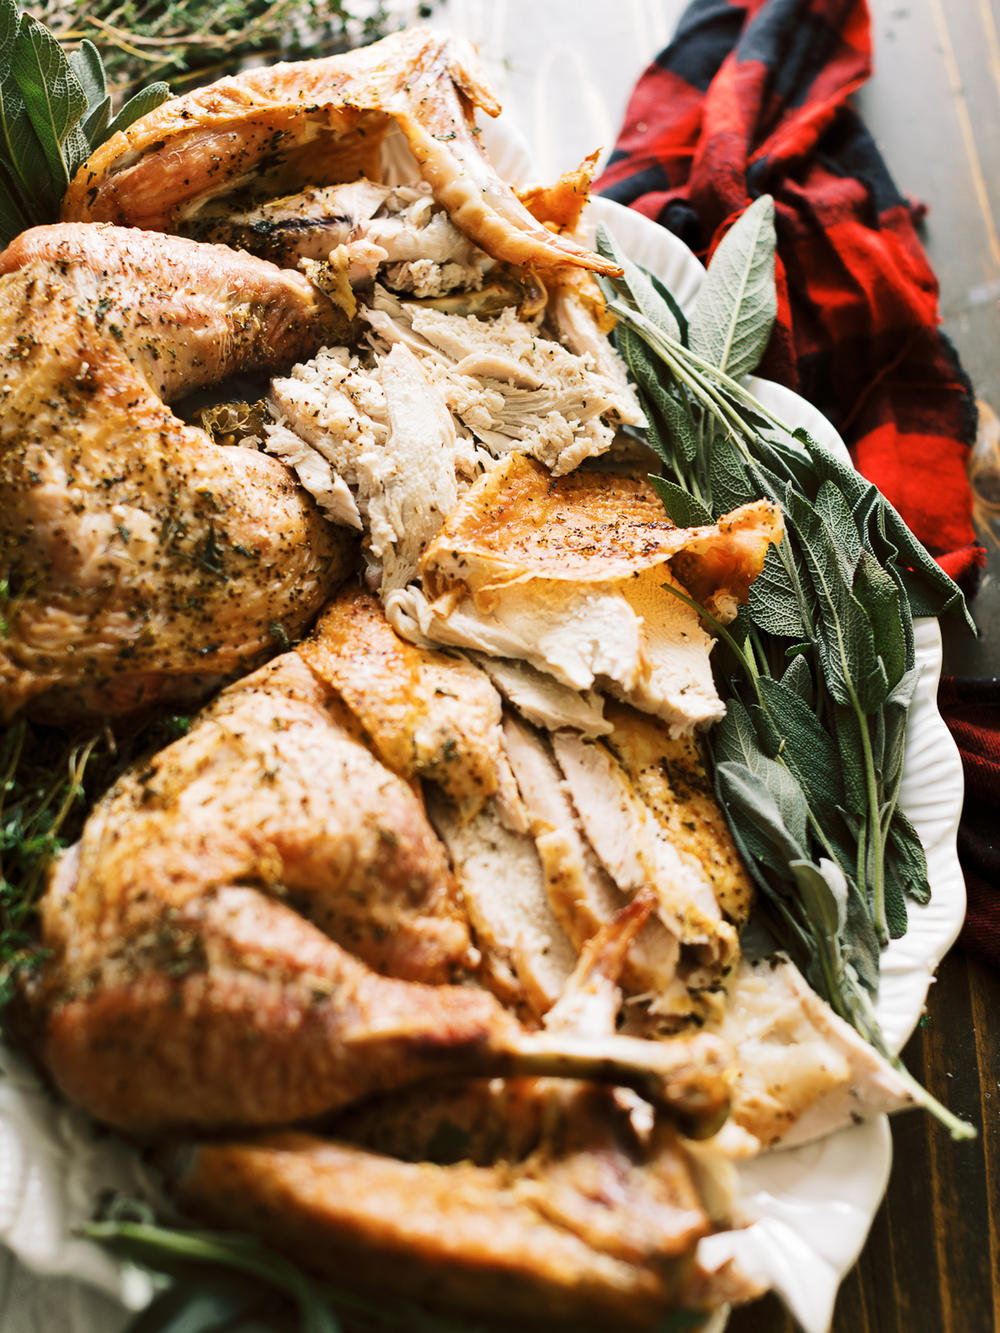 Spatchcocked turkey, roasted to the right temperature results in properly cooked thighs and tender breasts.